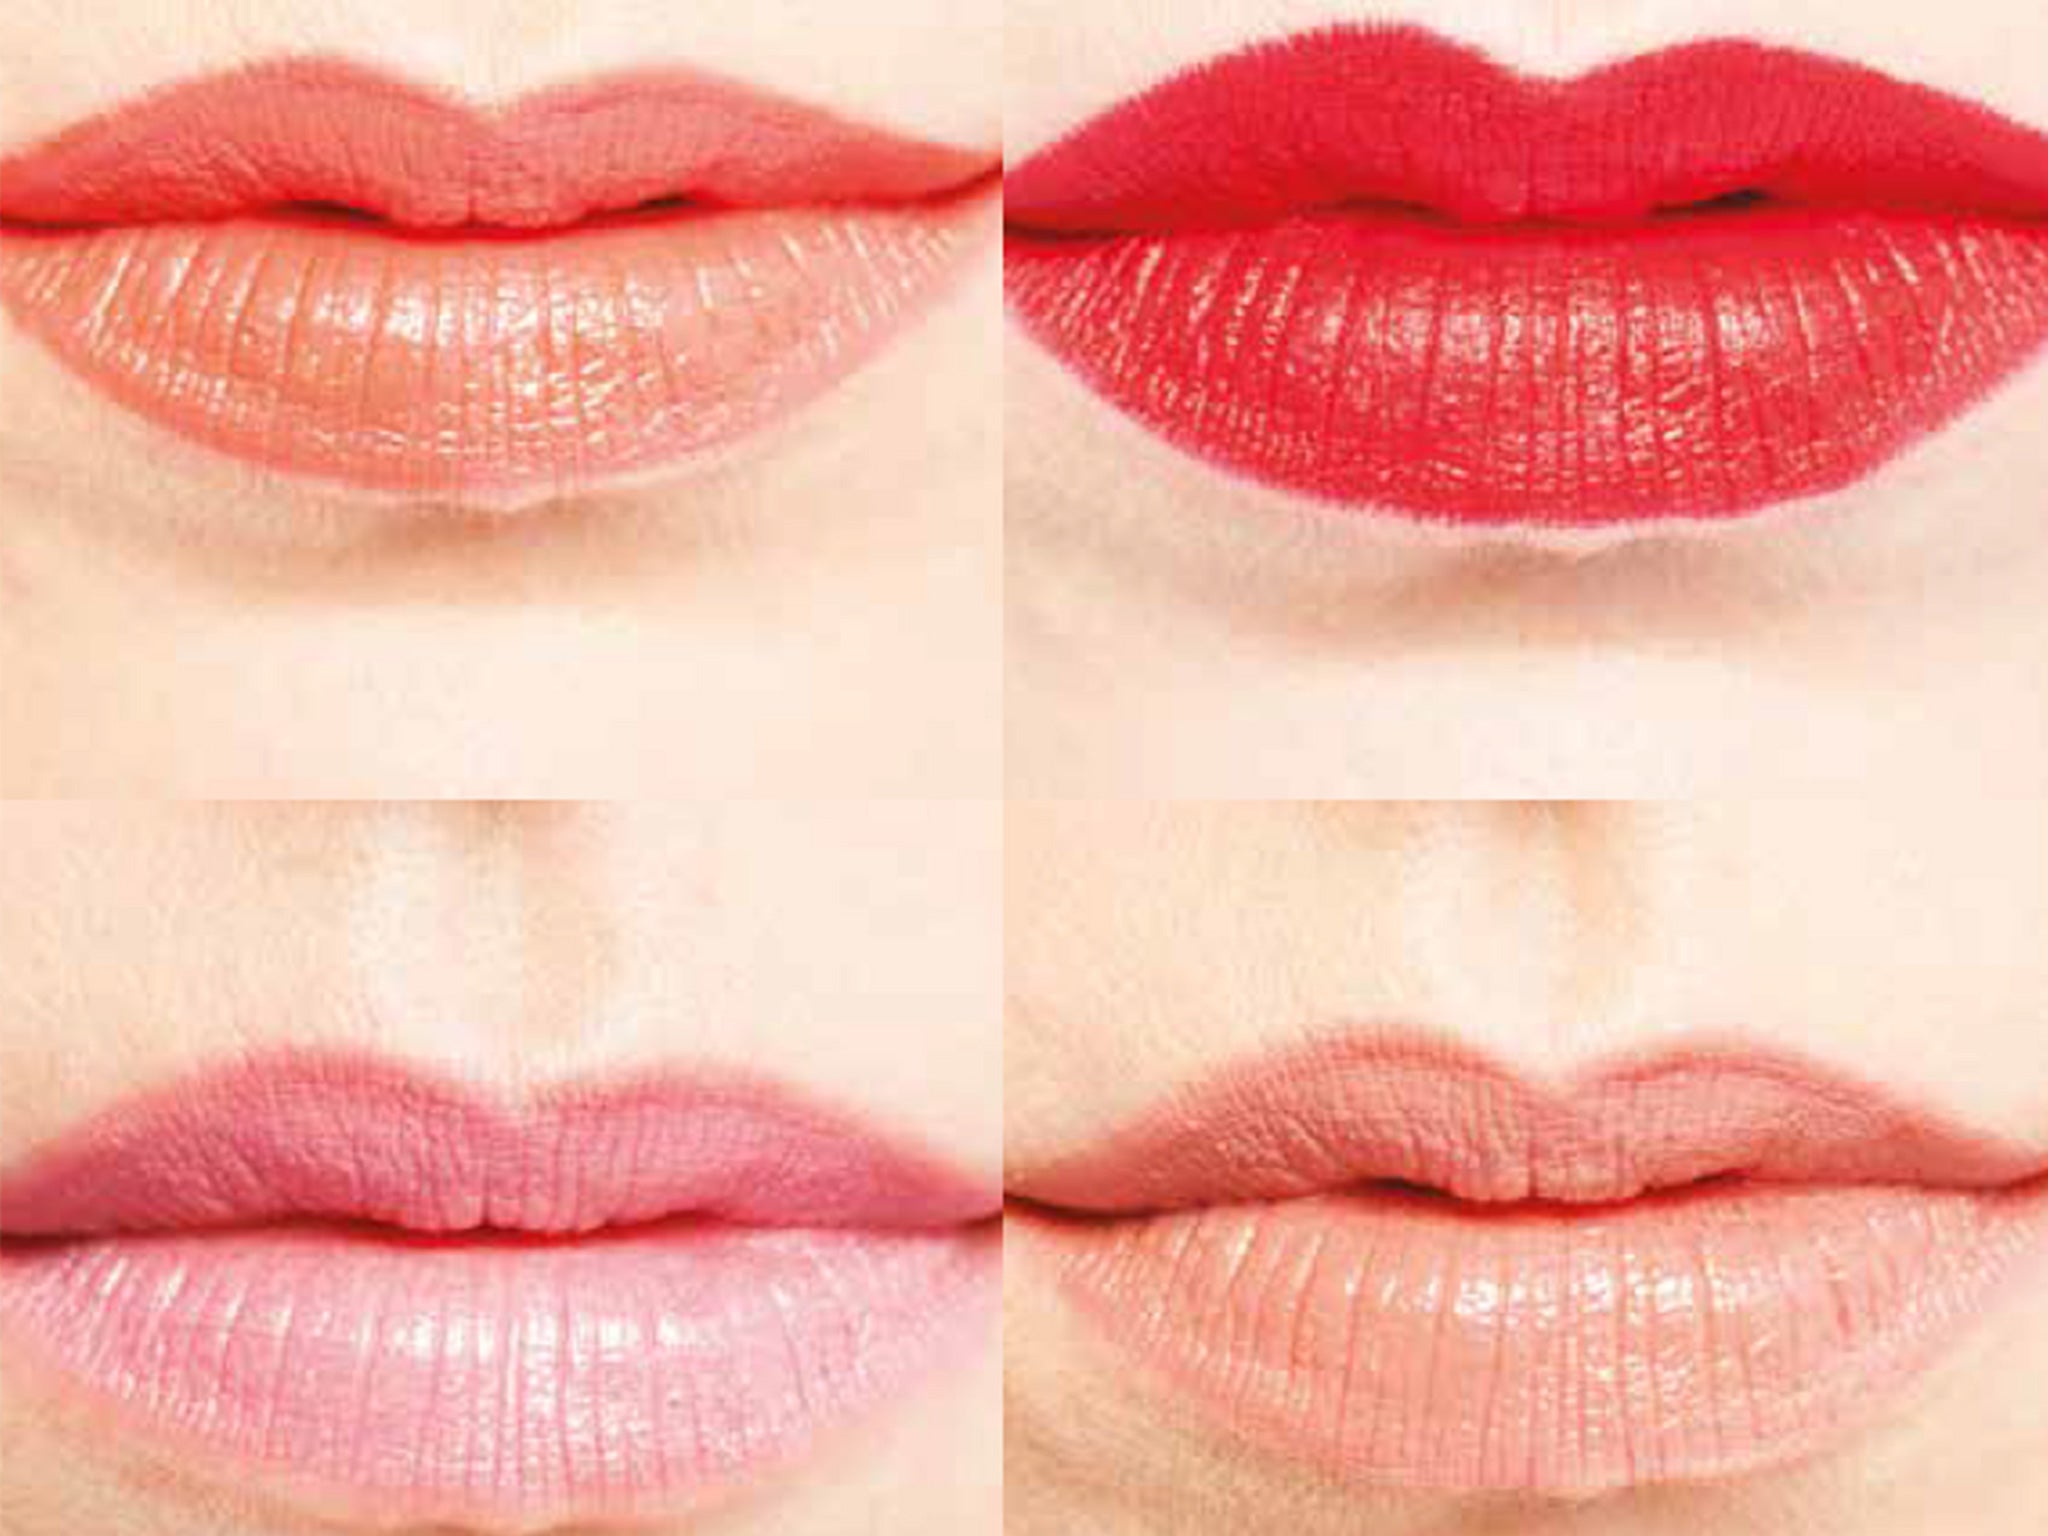 Study reveals the world's most popular lipstick shades and who buys them, The Independent